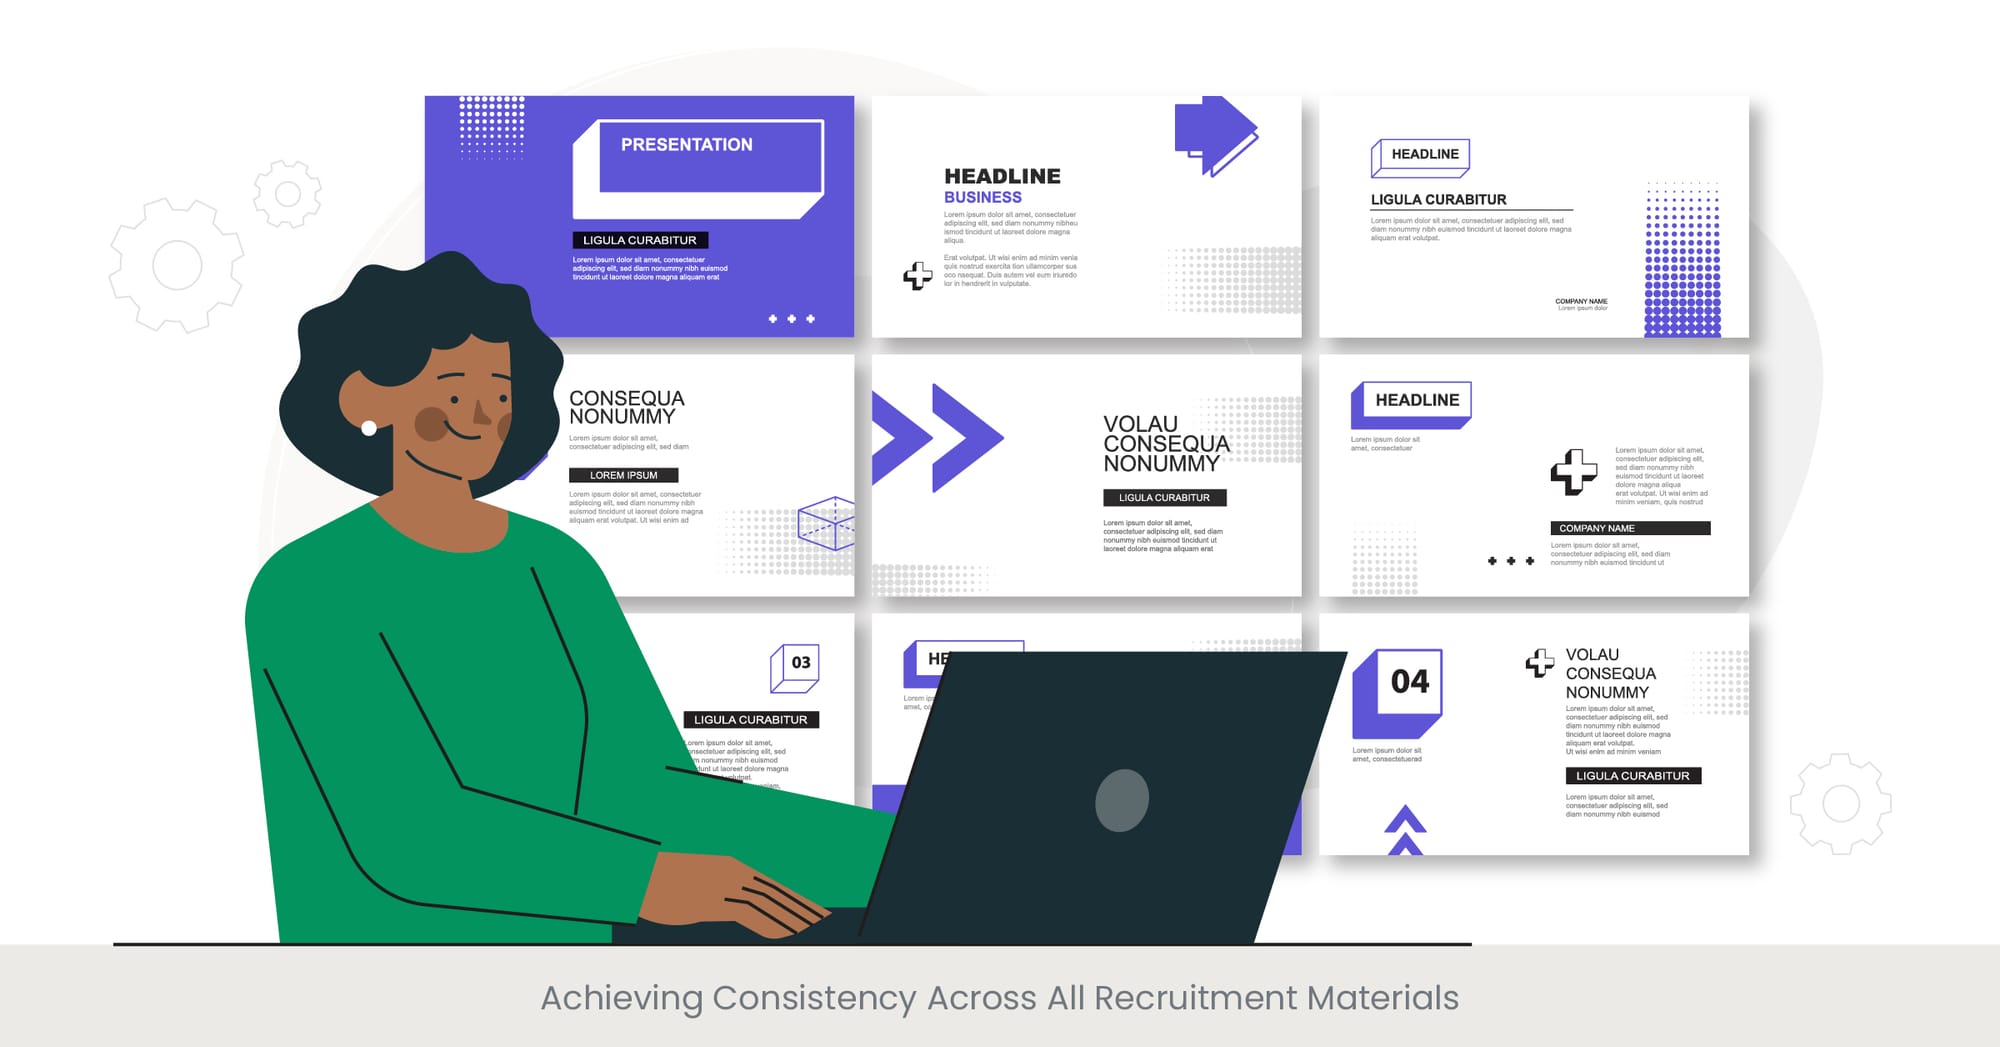 Achieving Consistency Across All Recruitment Materials